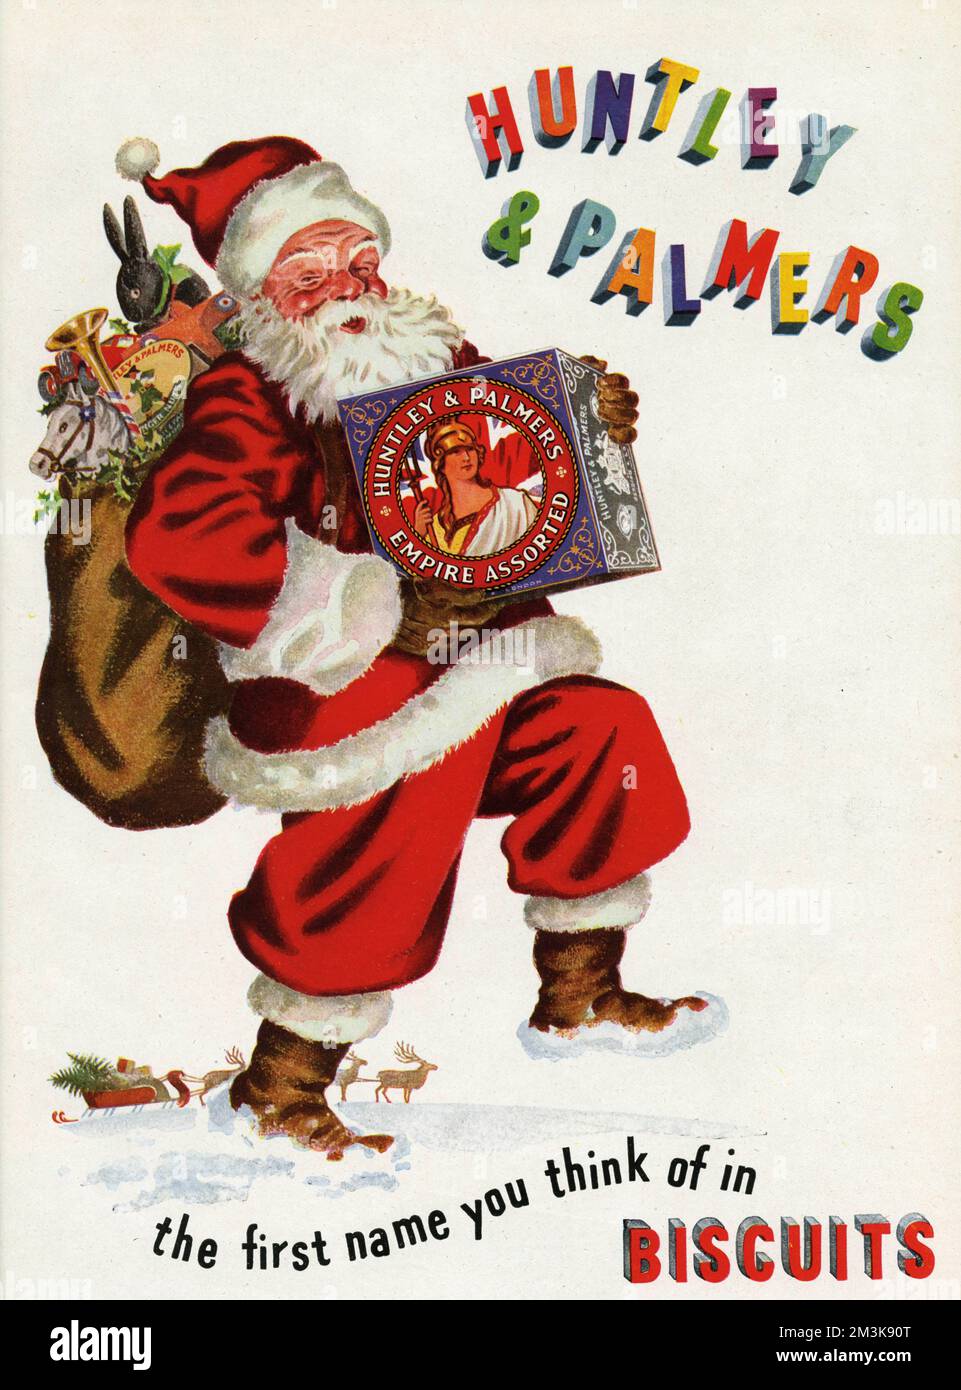 Huntley and Palmers biscuits advertisement with Father Christmas holding a box of Empire Assorted biscuits     Date: 1947 Stock Photo